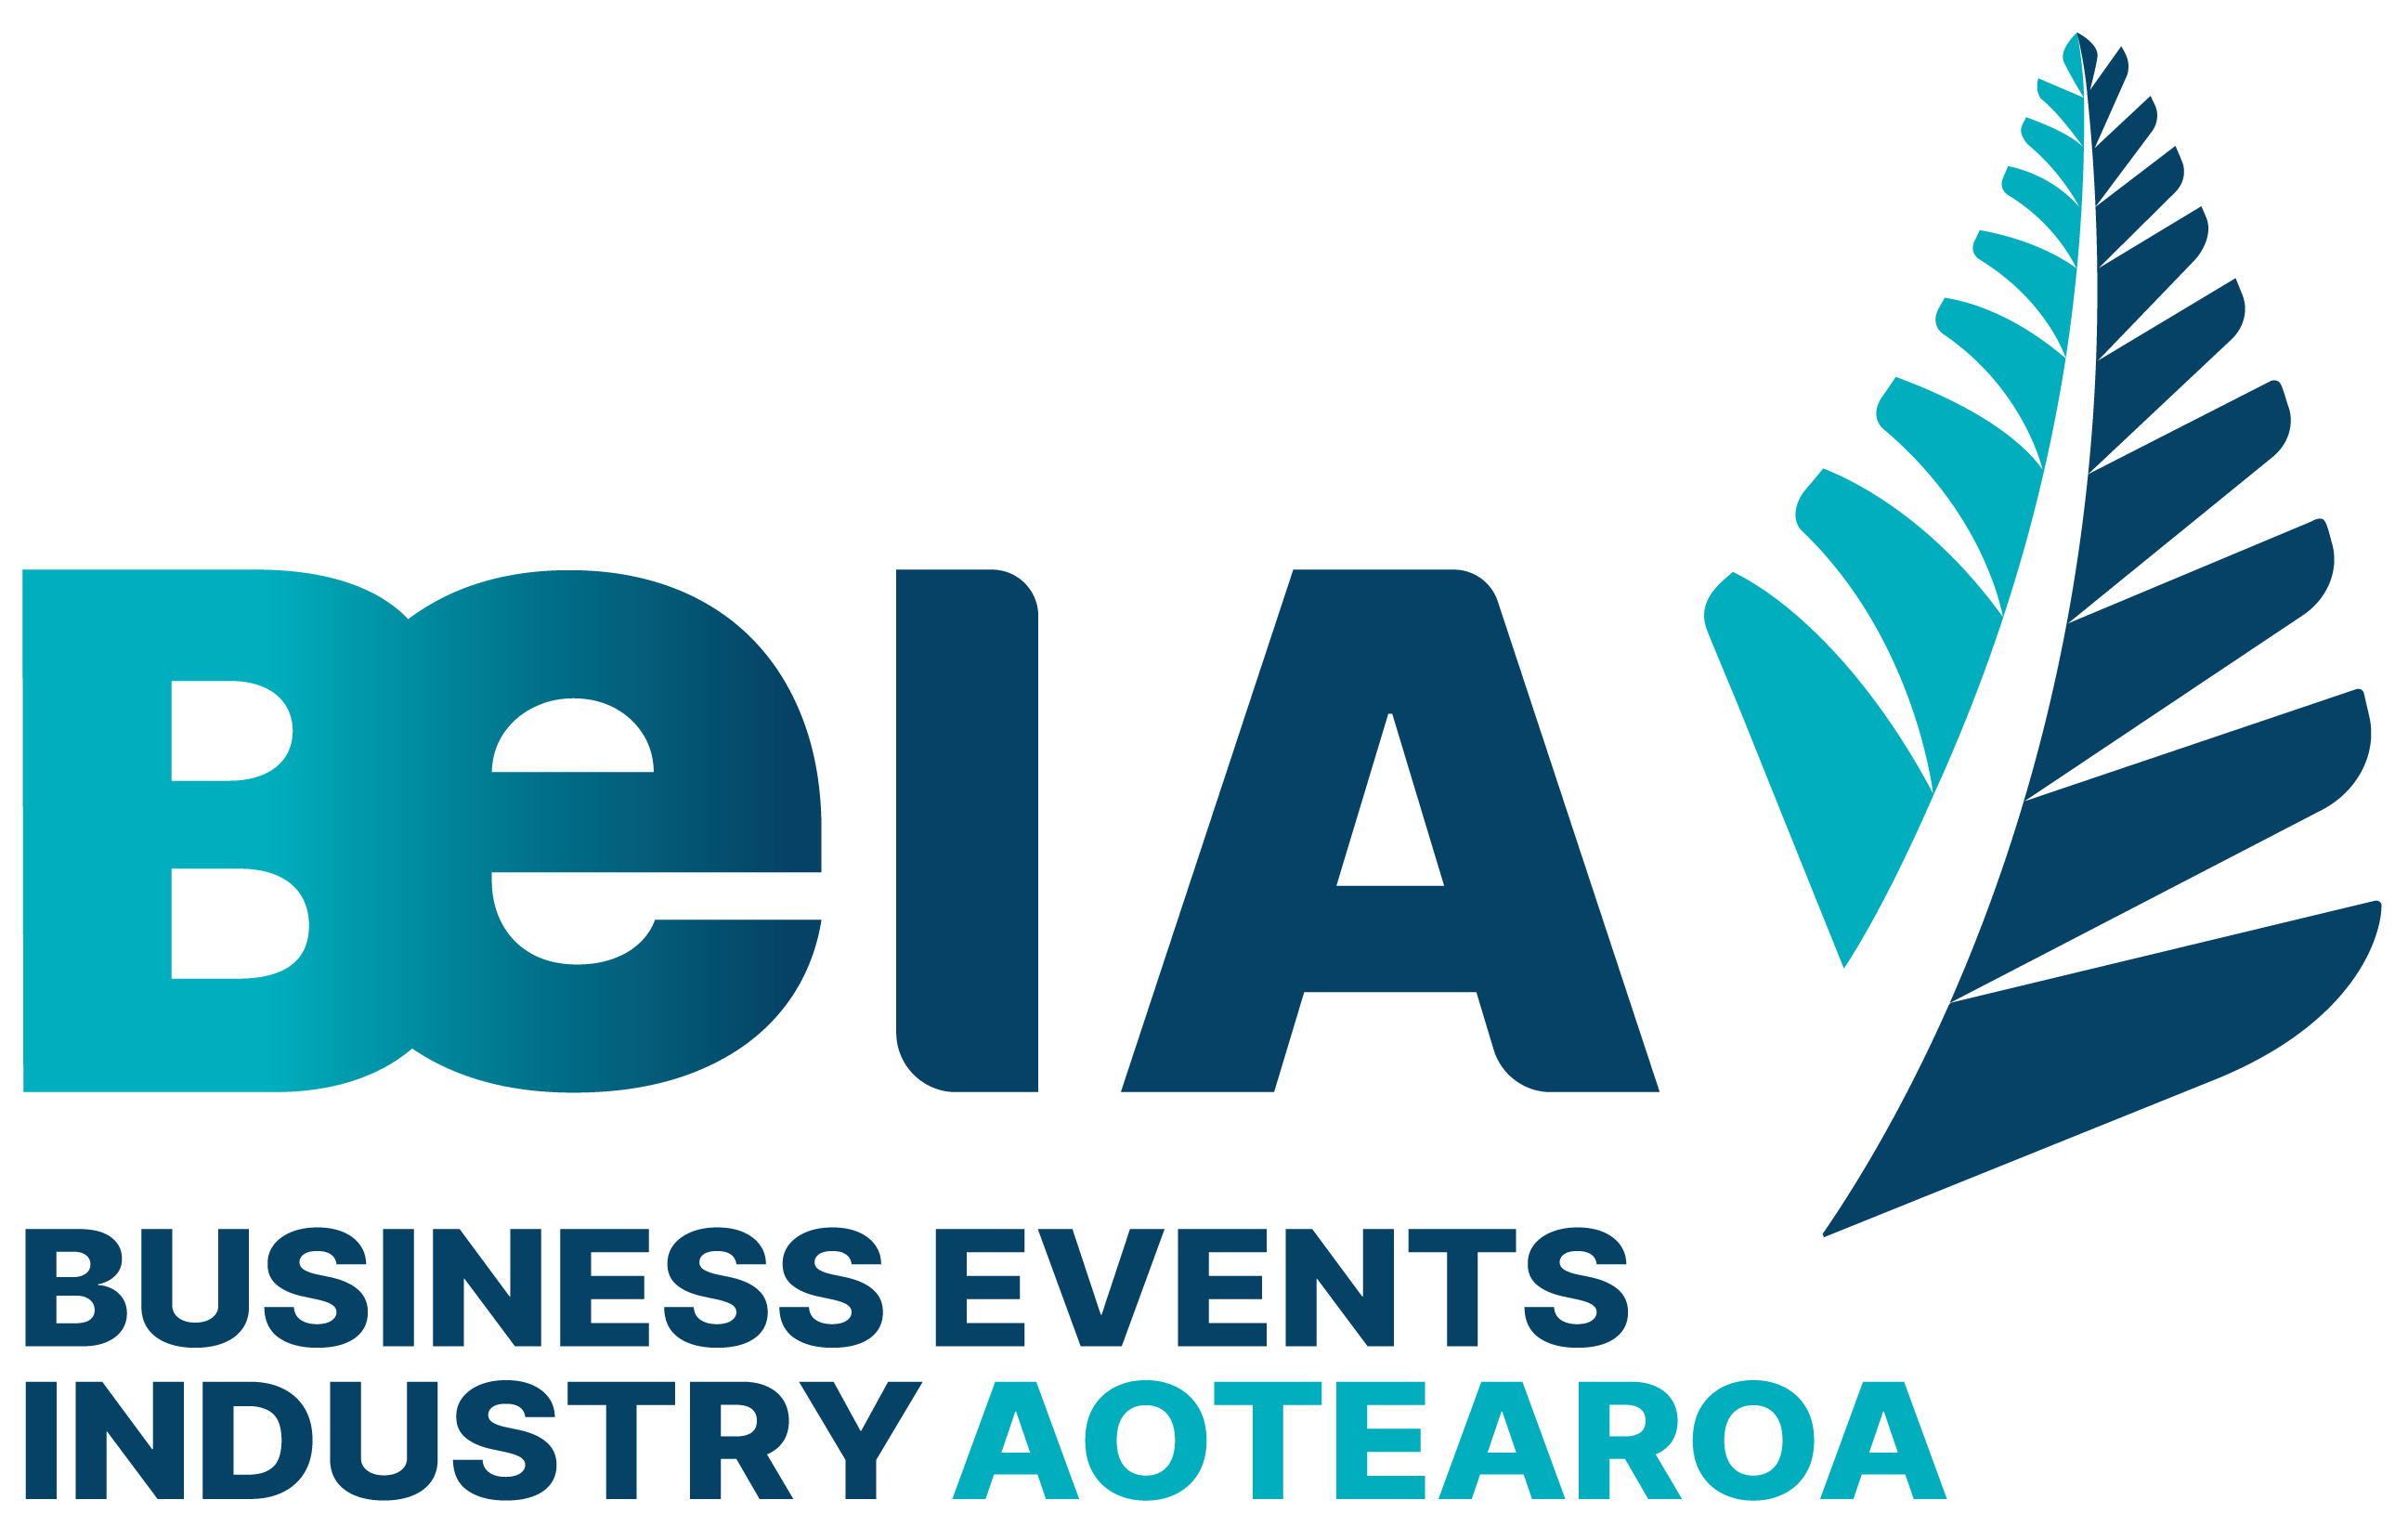 Business Events Industry Aotearoa